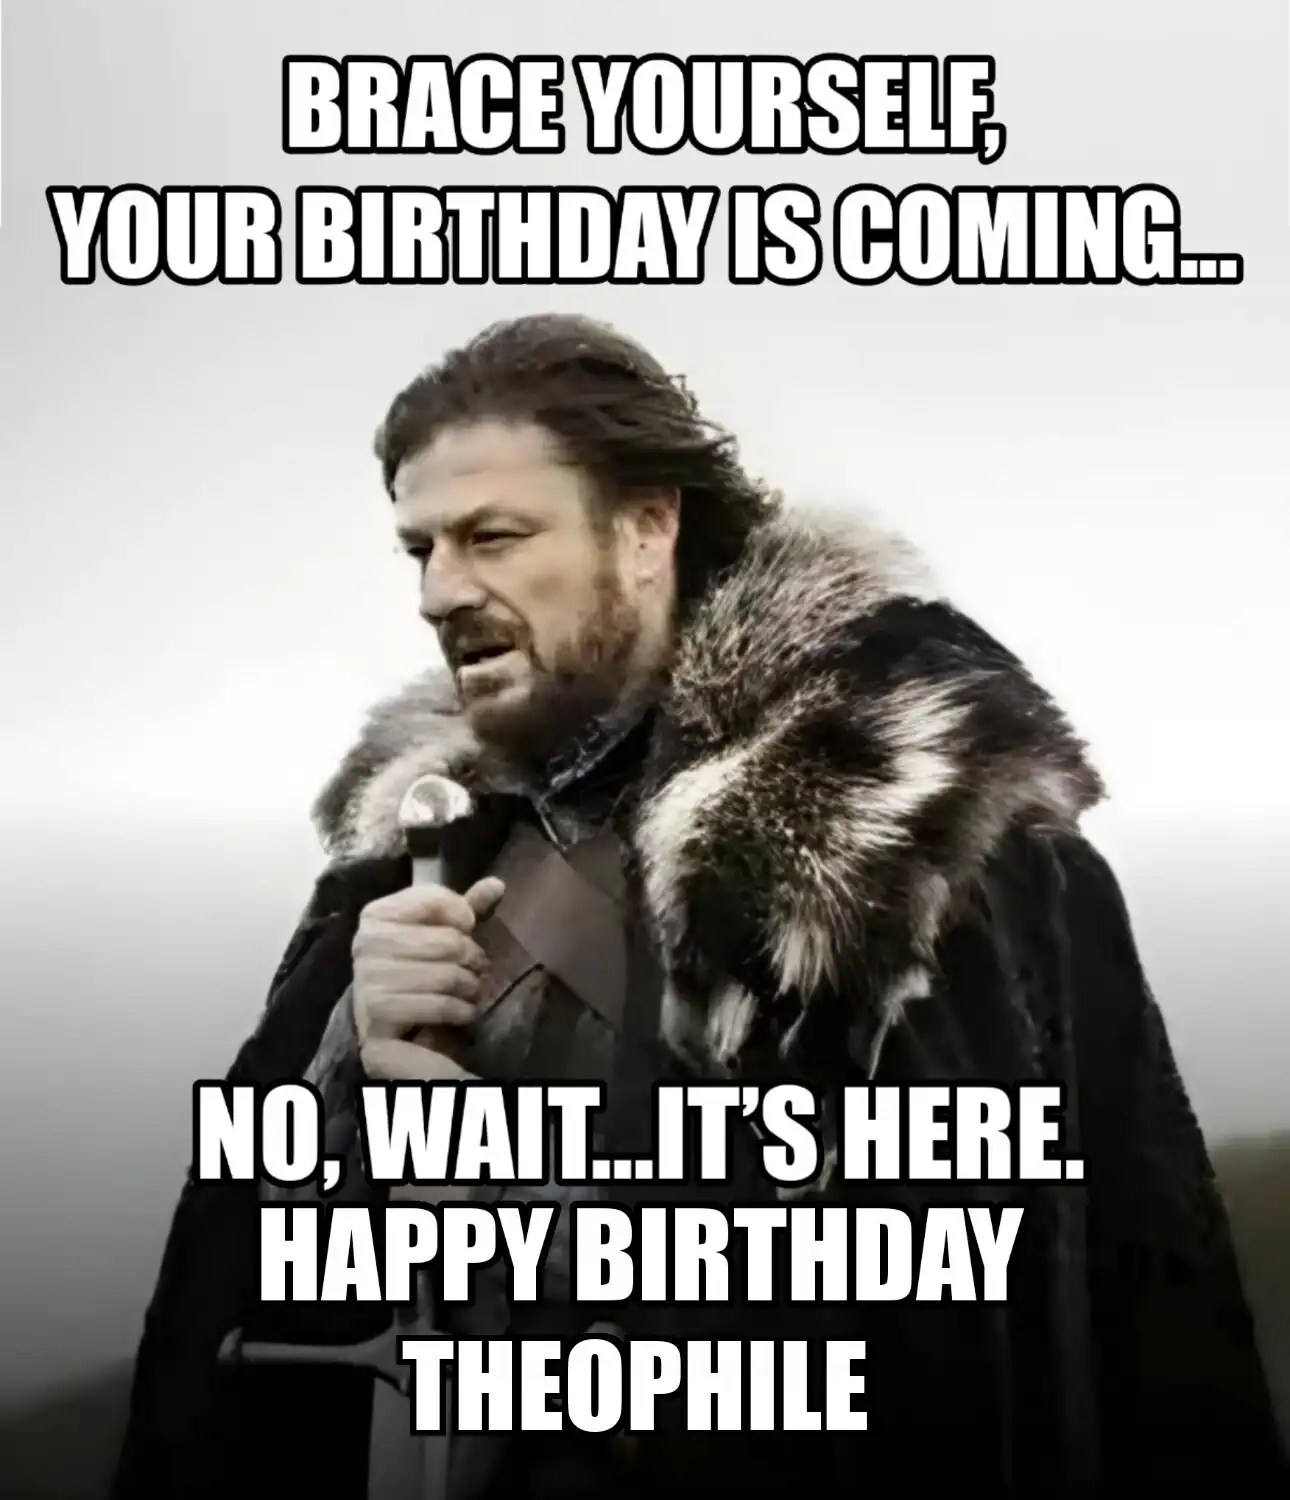 Happy Birthday Theophile Brace Yourself Your Birthday Is Coming Meme